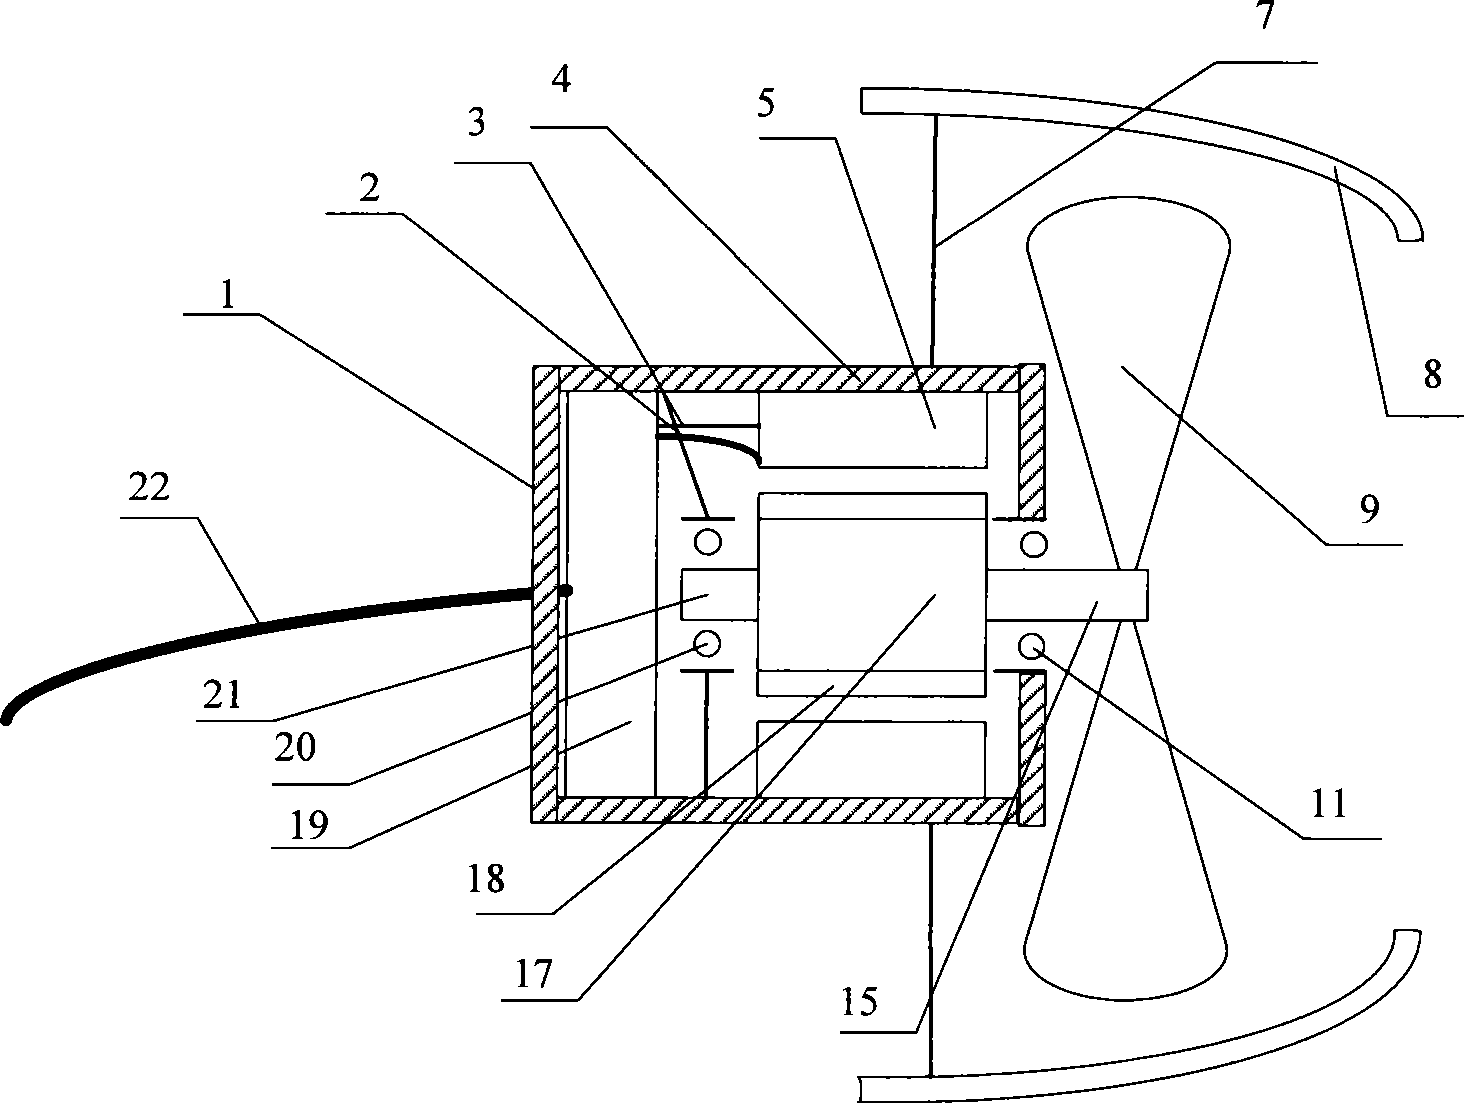 Underwater motor and thruster integrated apparatus